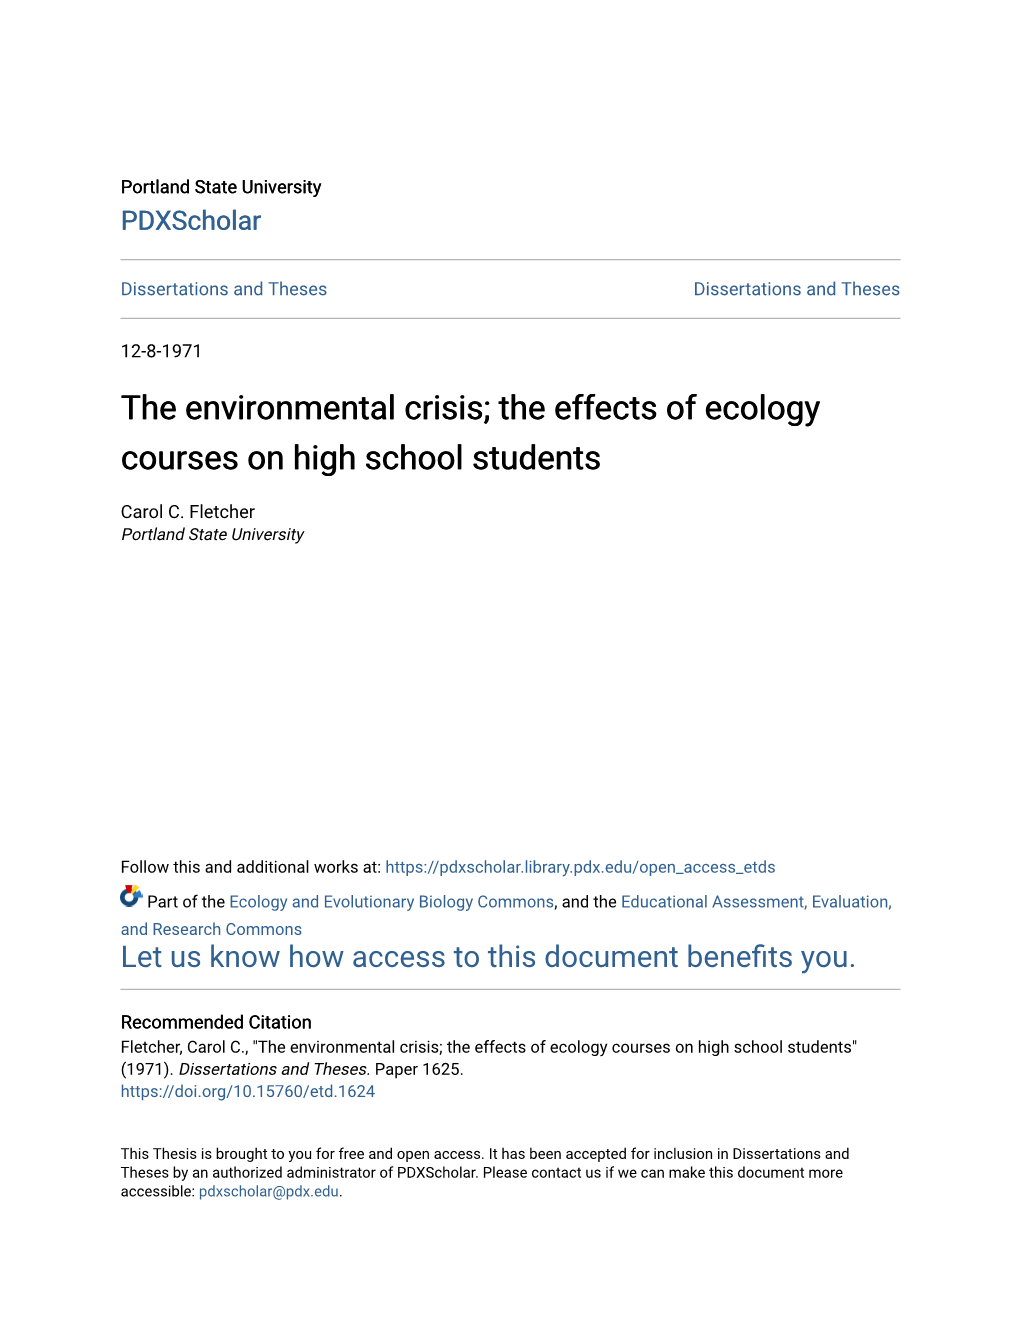 The Environmental Crisis; the Effects of Ecology Courses on High School Students